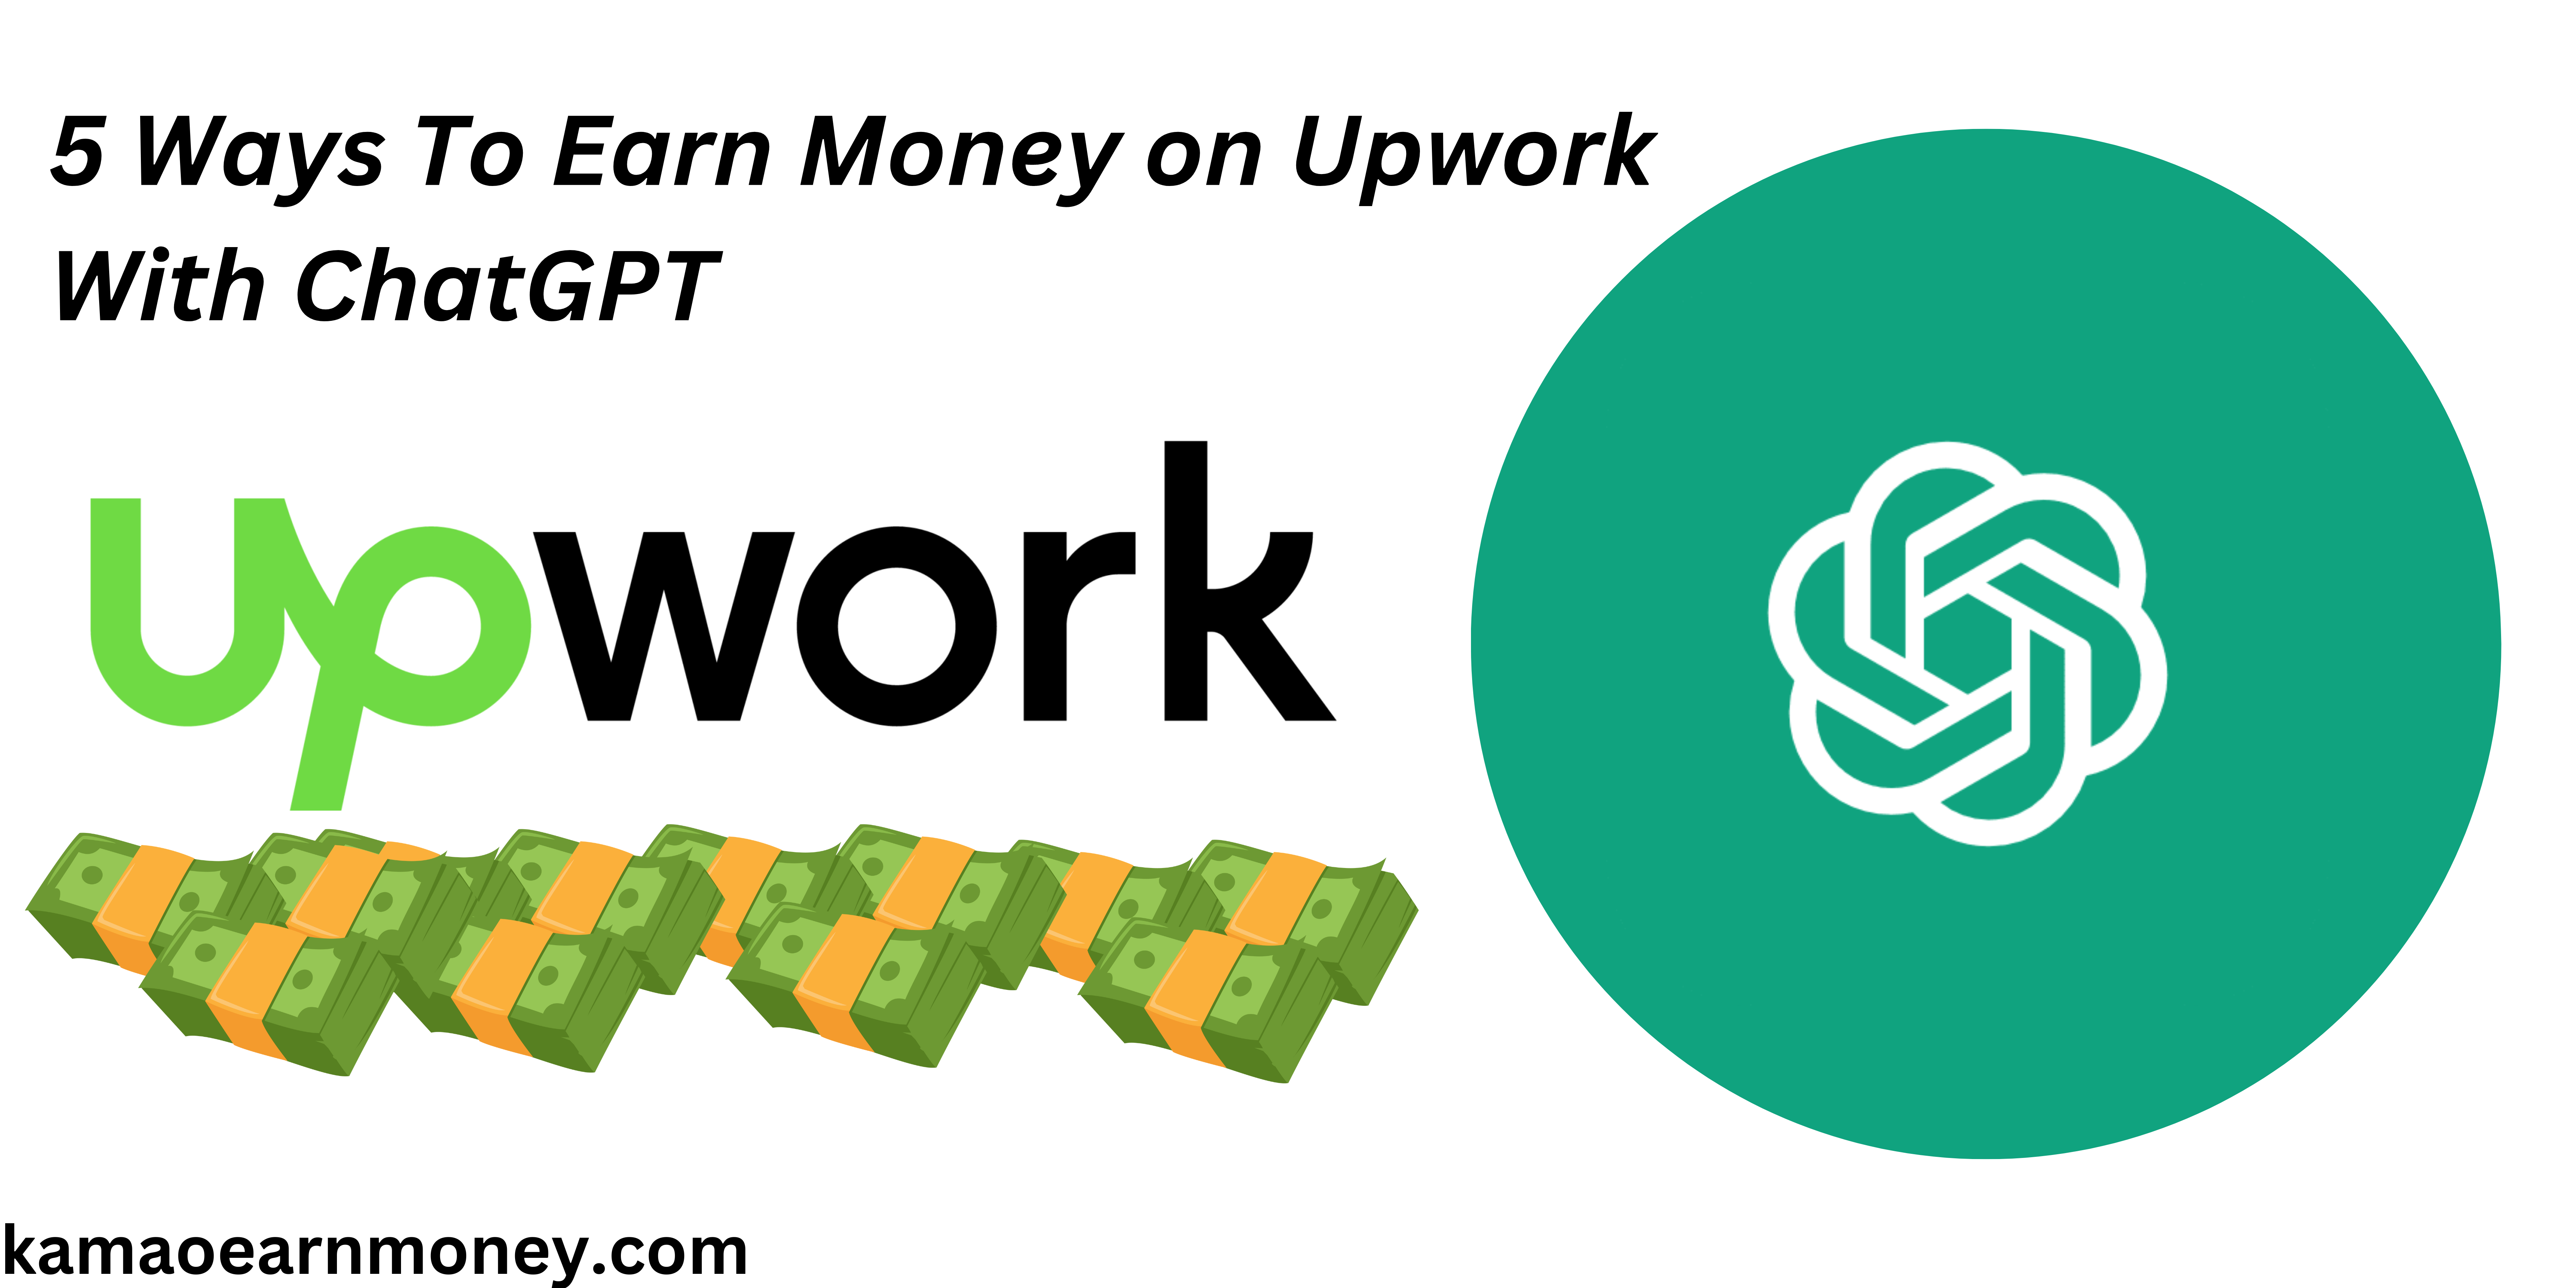 5 Ways To Earn Money on Upwork With ChatGPT